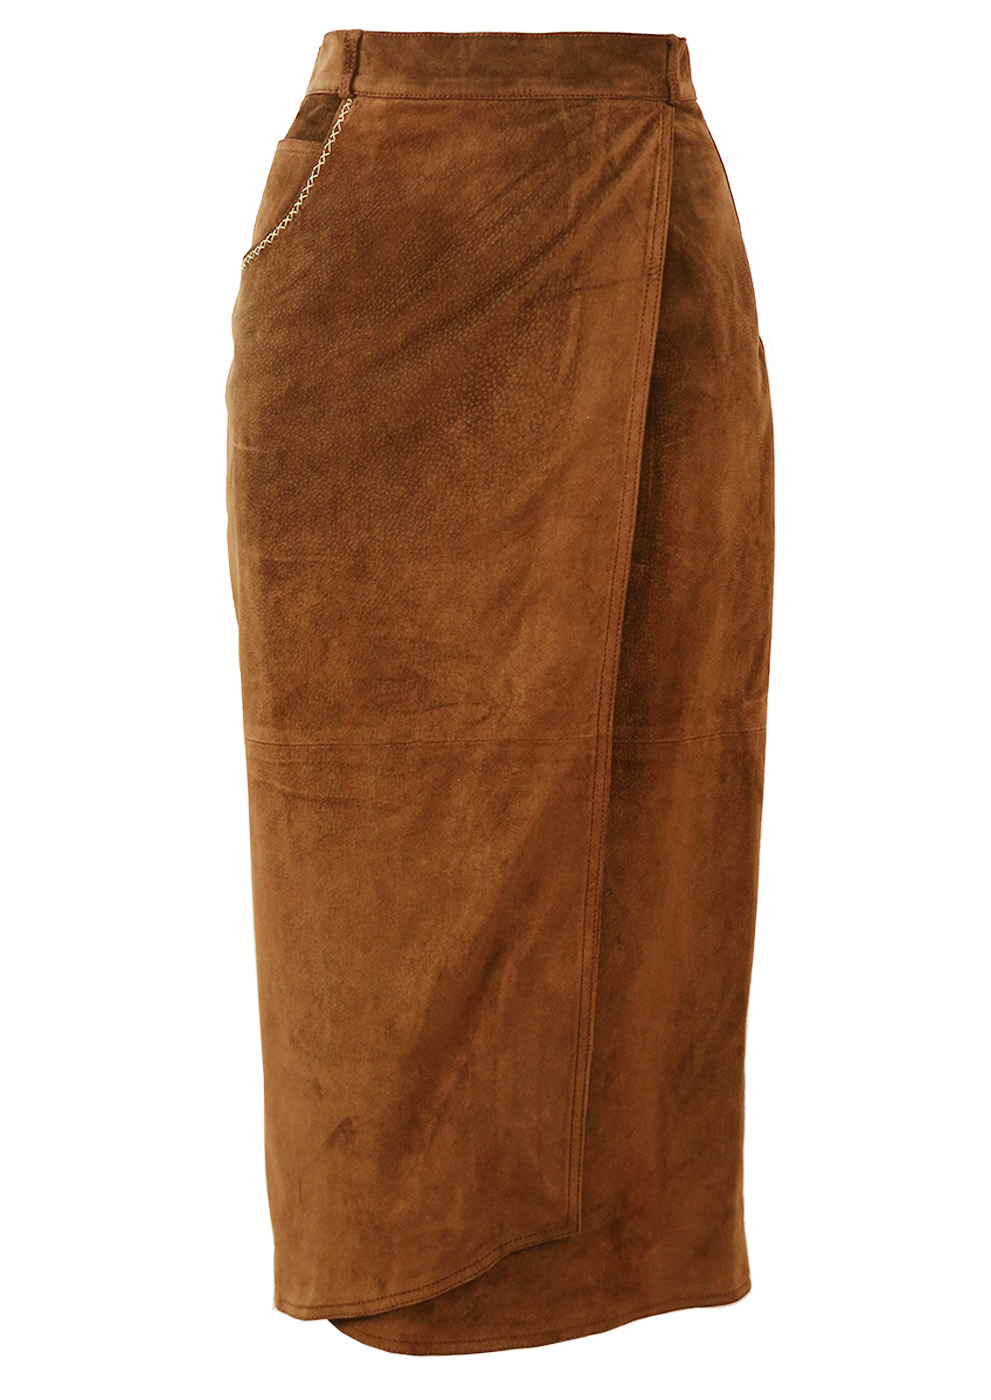 Brown Midi Length Suede Skirt with Asymmetric Wrap Front - S | Reign ...